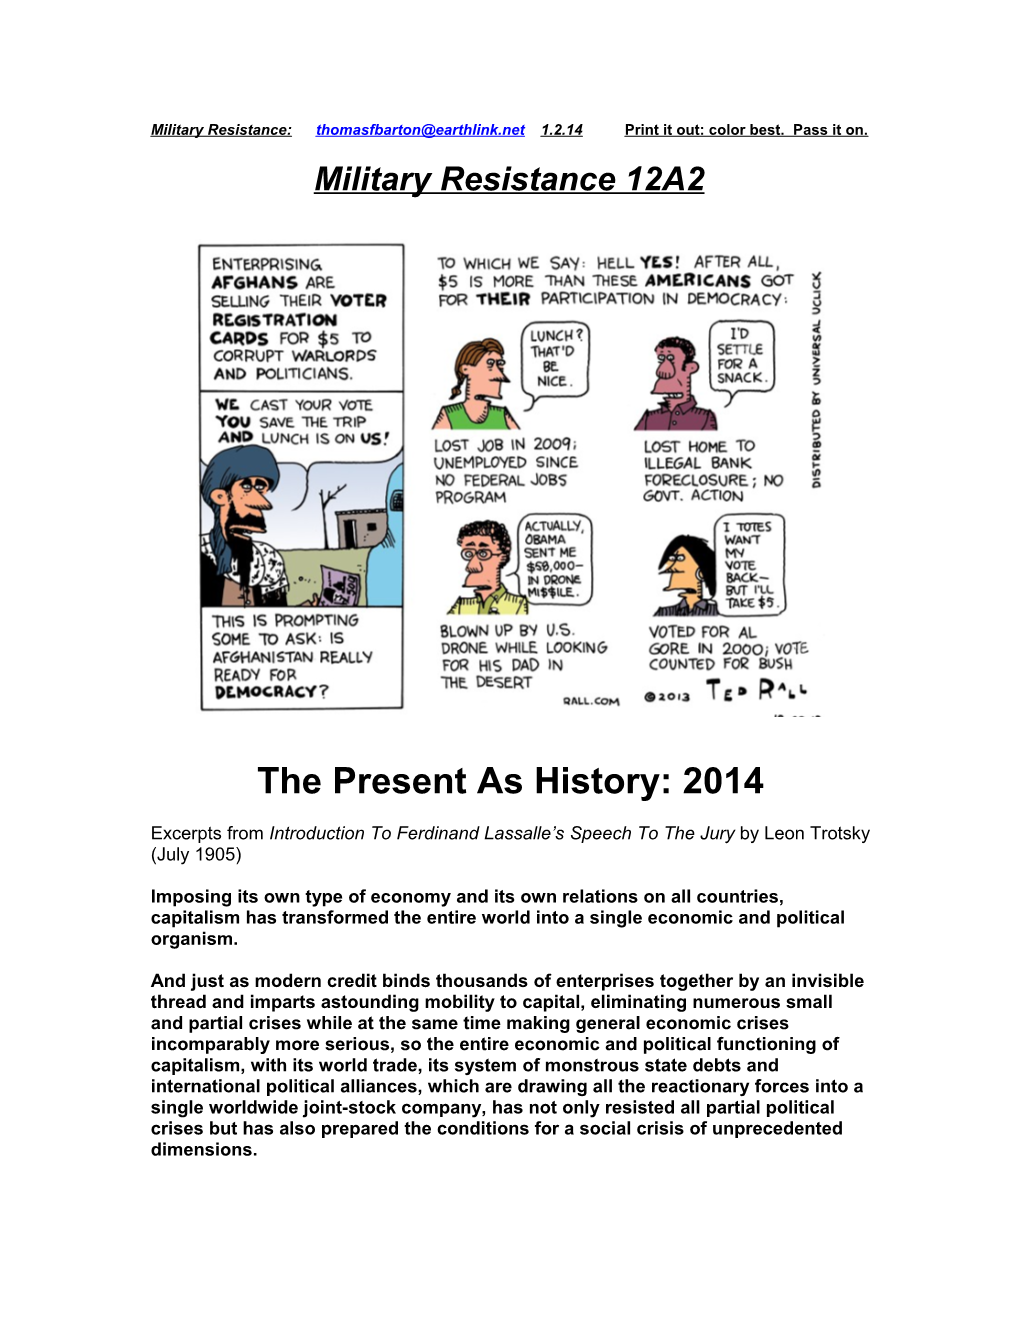 Military Resistance 12A2